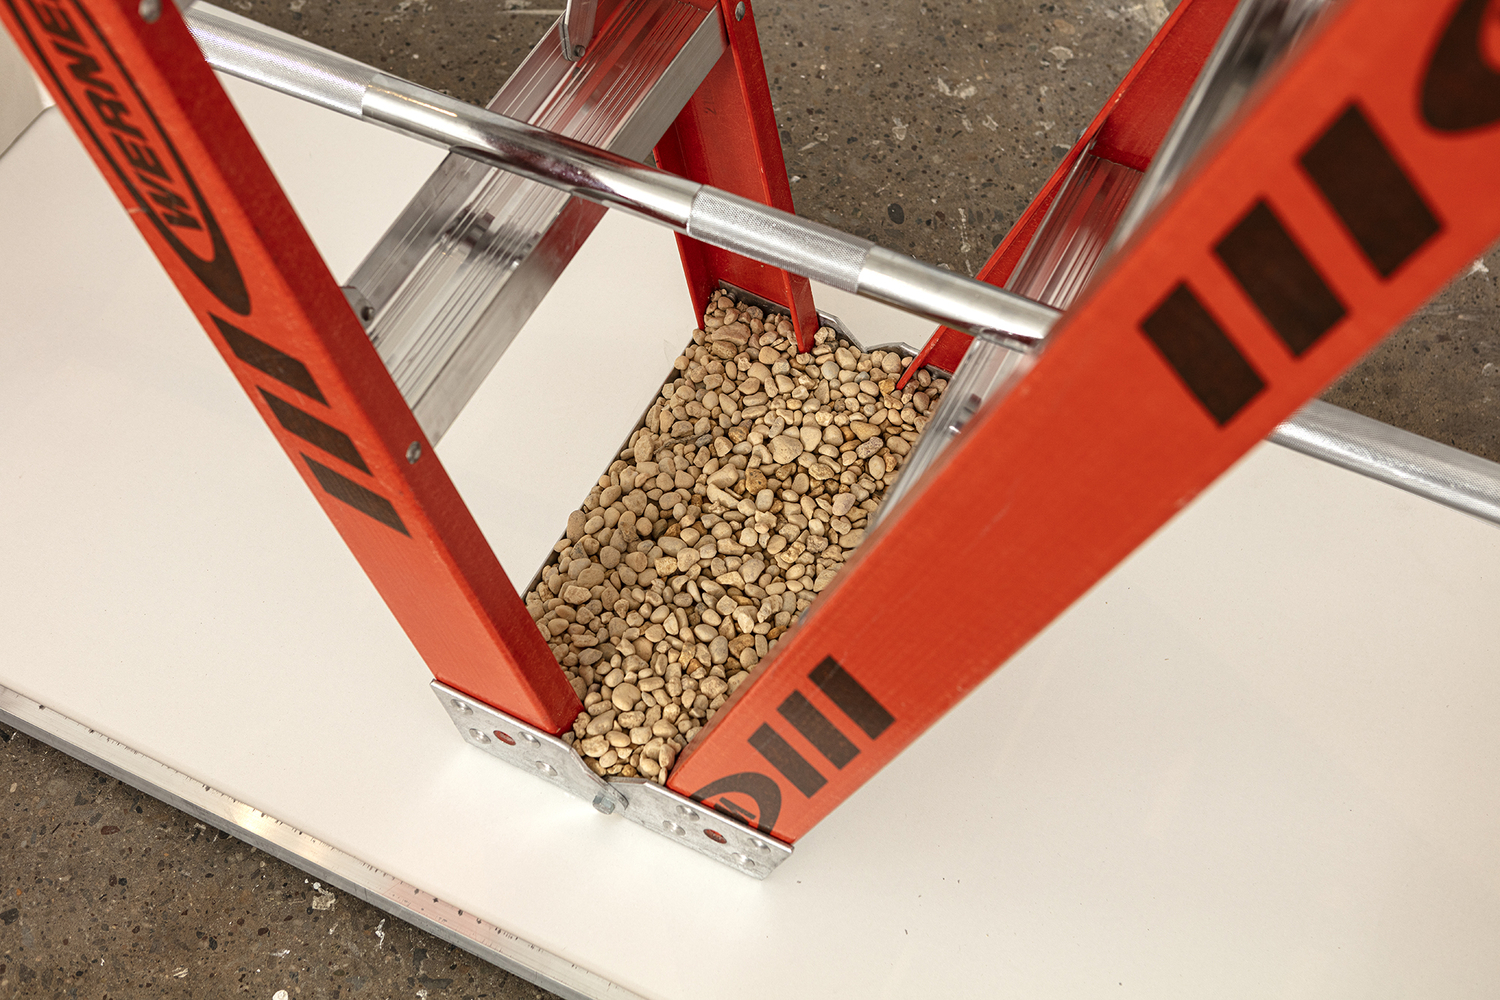 The top platform of the ladder is upside down touching the floor and has been filled with gravel